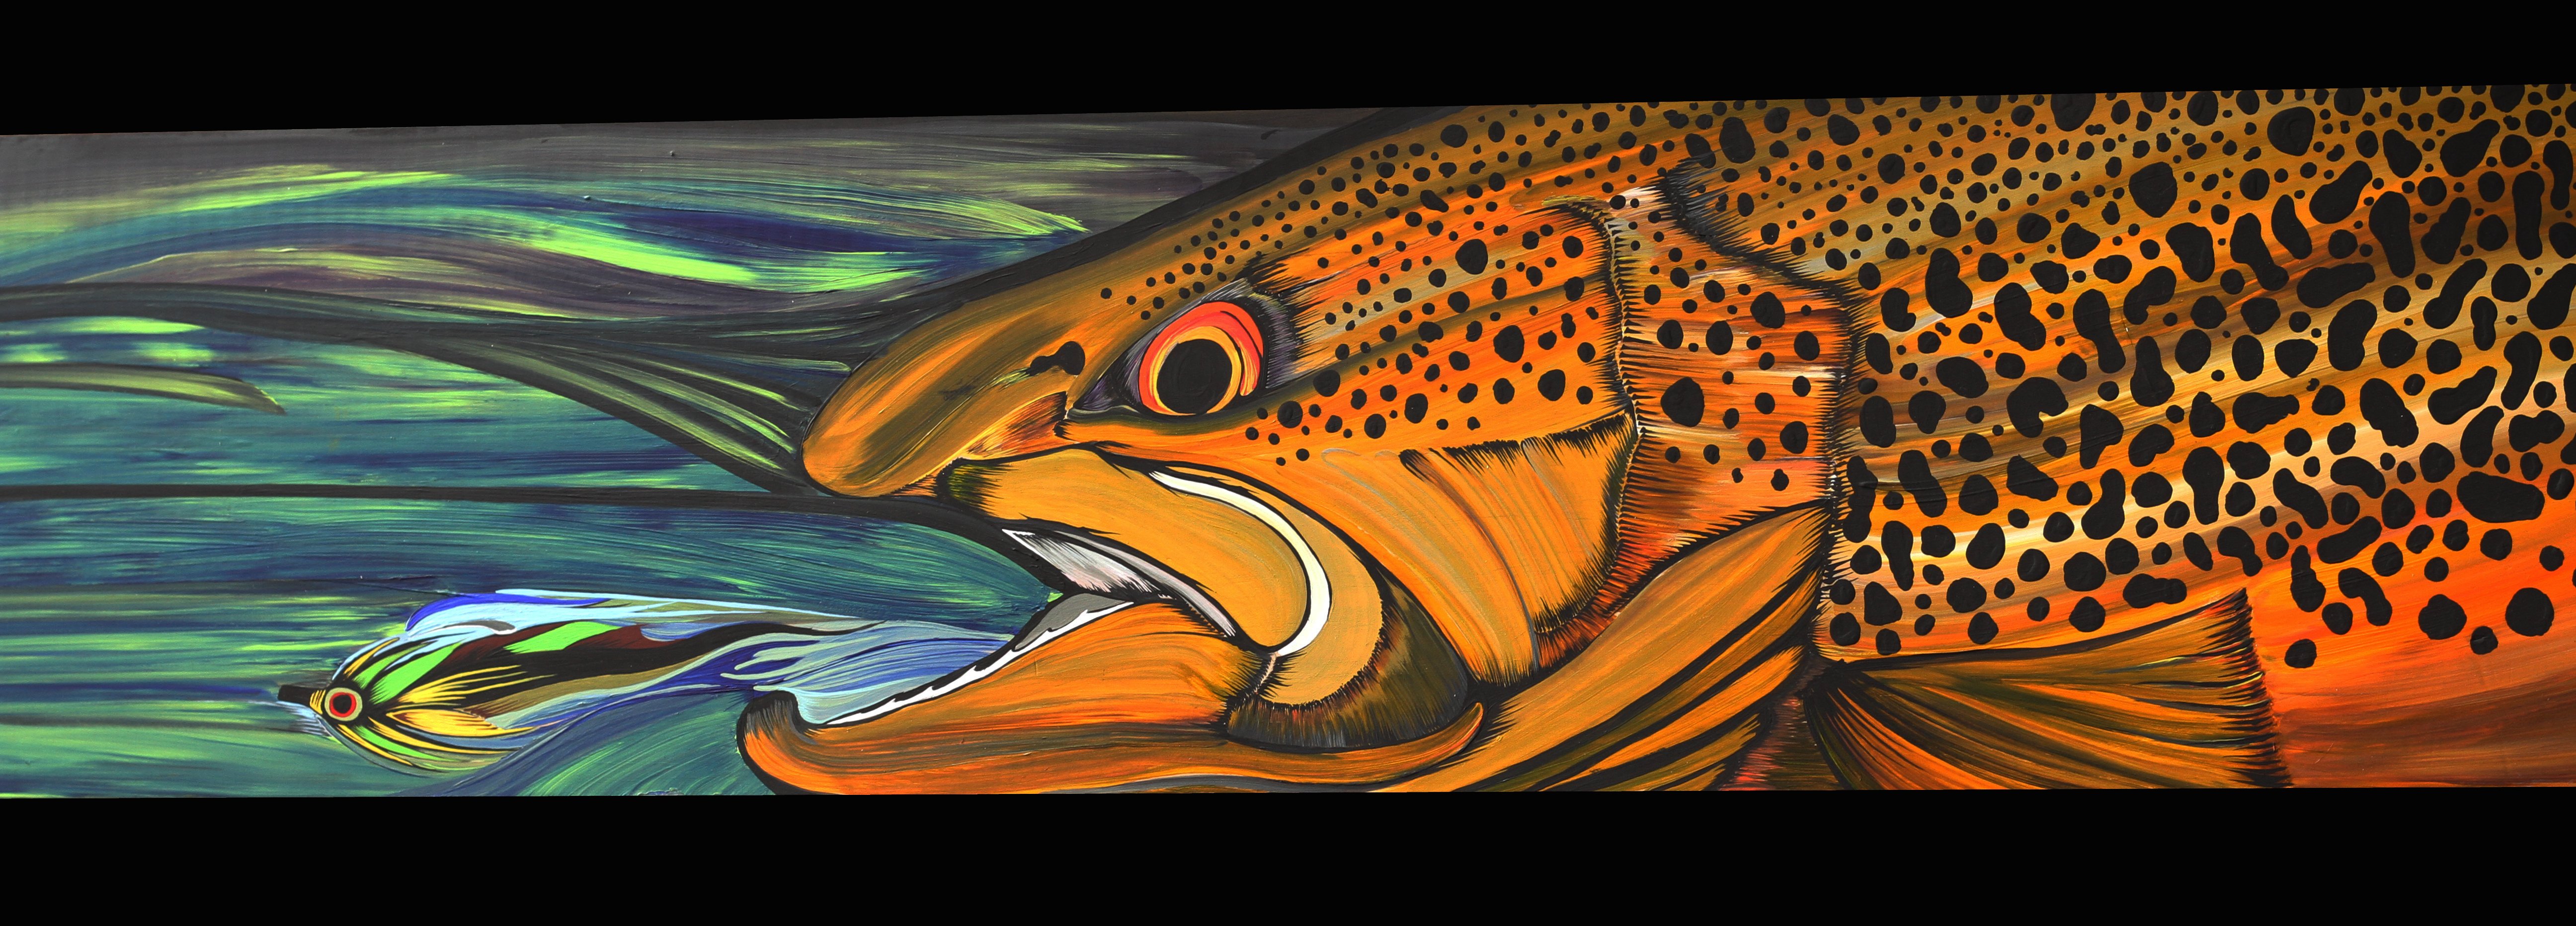 fishing, Fish, Sport, Fishes, Bass, Trout, Artwork, Painting Wallpaper